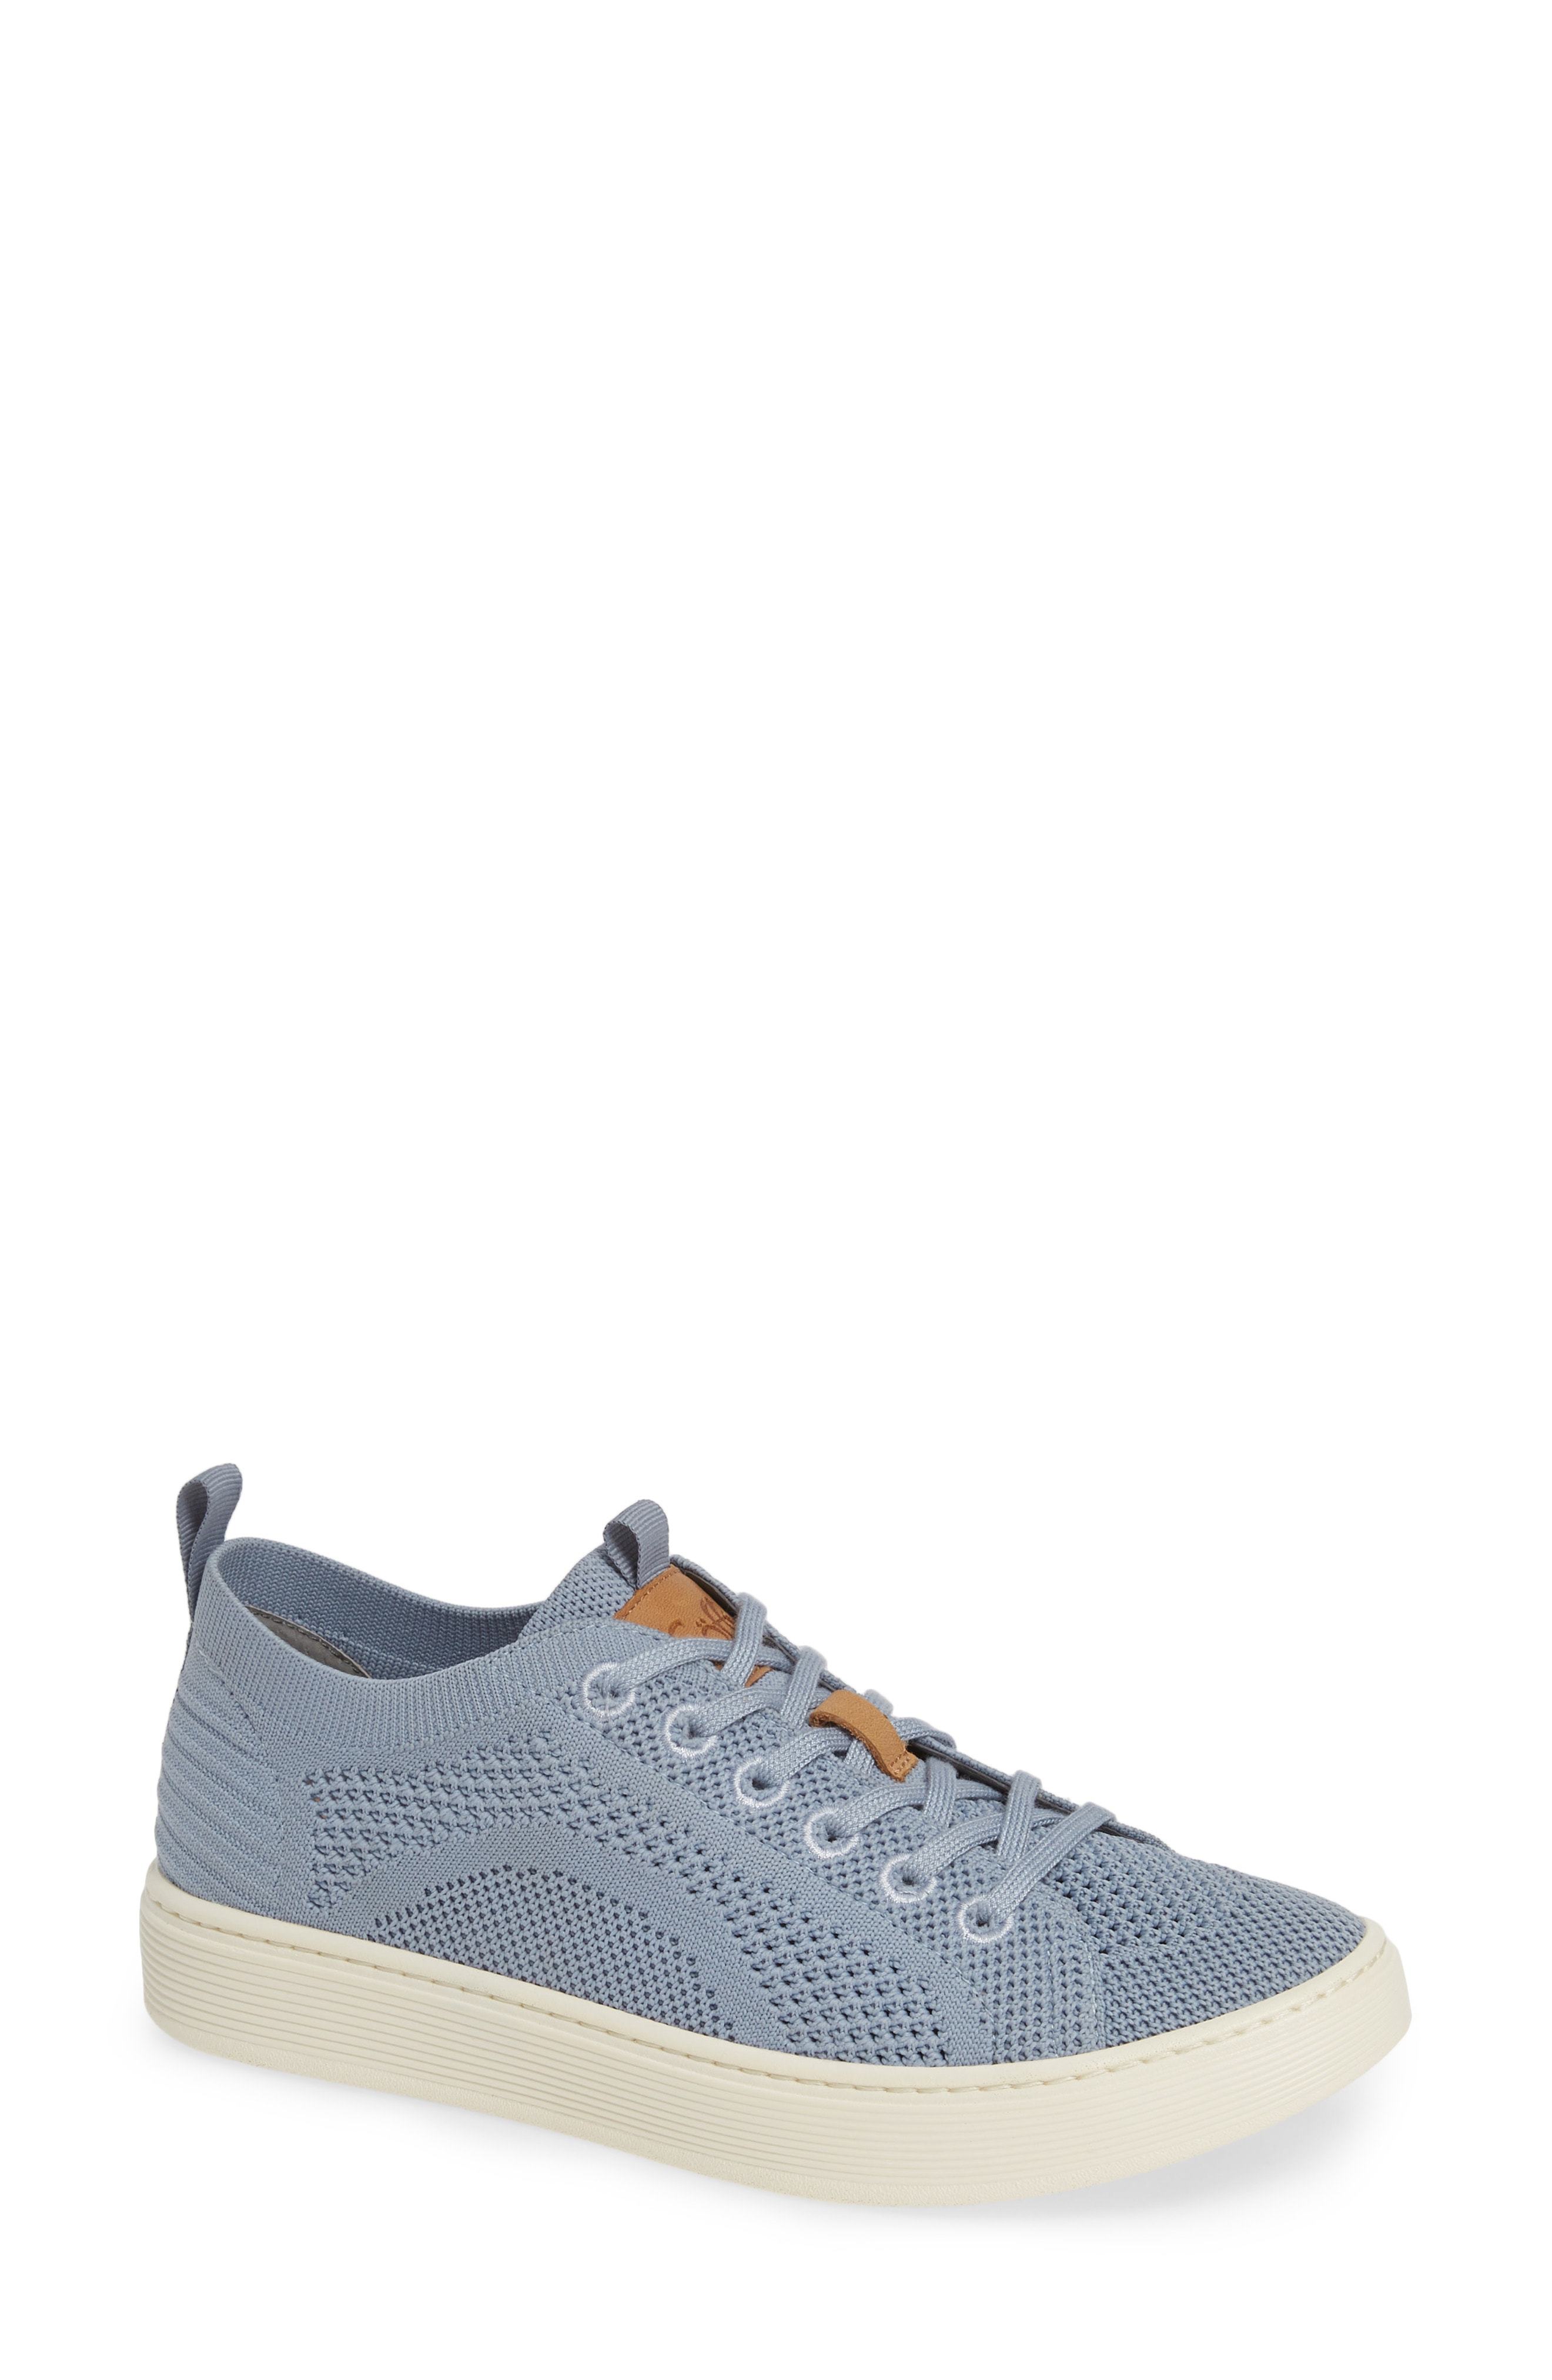 Sofft Somers Knit Sneaker, $109 | Nordstrom | Lookastic